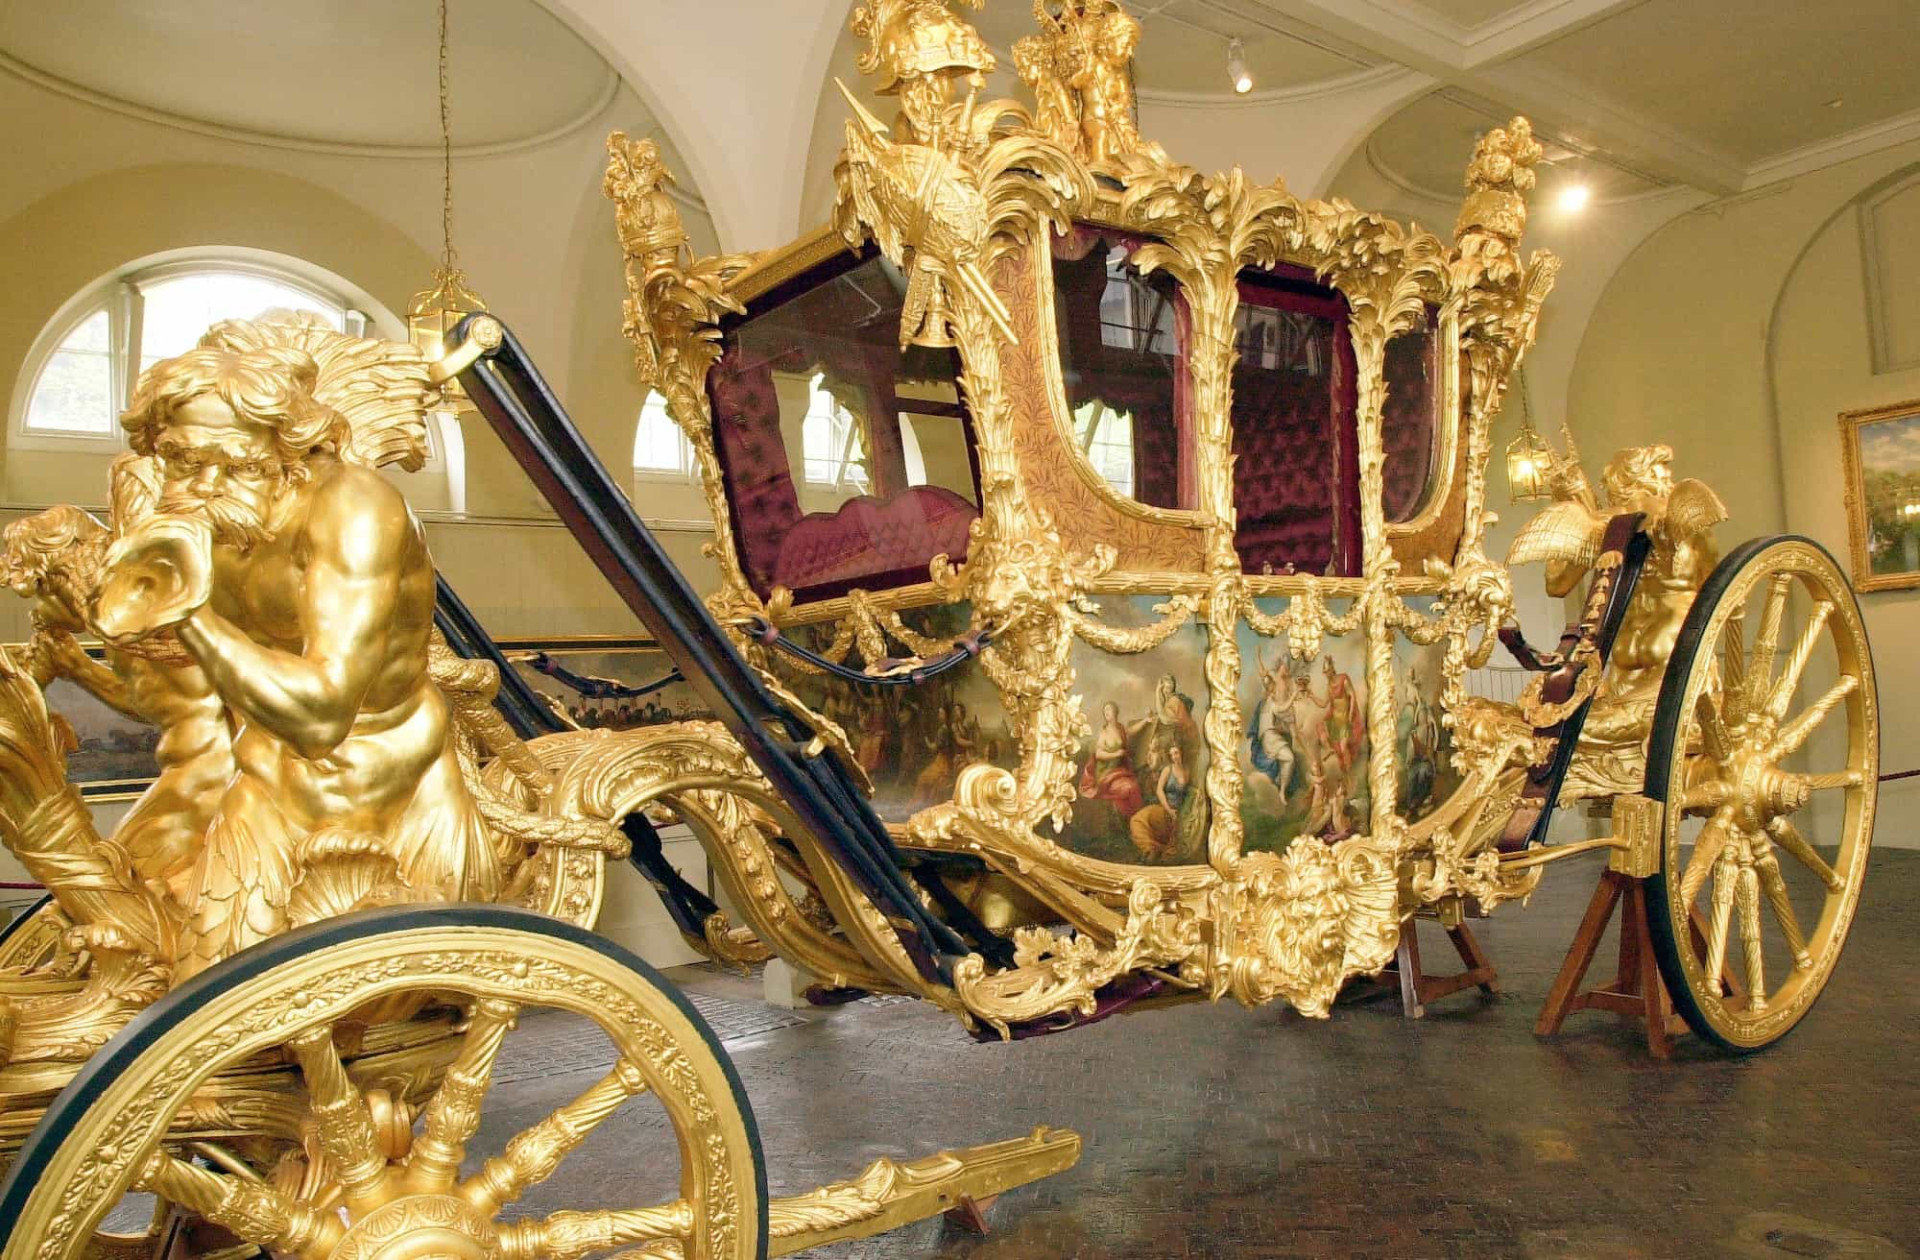 <p>The undoubted stars of the horse-drawn era were the state coaches built for royalty across Europe. The British royal family in particular is associated with some of the finest ever created. The glittering Gold State Coach was commissioned in 1762 by King George II. The coach was used for Queen Elizabeth II's coronation and as part of Her Majesty's Platinum Jubilee celebrations in May 2022.</p><p><a href="https://www.msn.com/en-us/community/channel/vid-7xx8mnucu55yw63we9va2gwr7uihbxwc68fxqp25x6tg4ftibpra?cvid=94631541bc0f4f89bfd59158d696ad7e">Follow us and access great exclusive content every day</a></p>